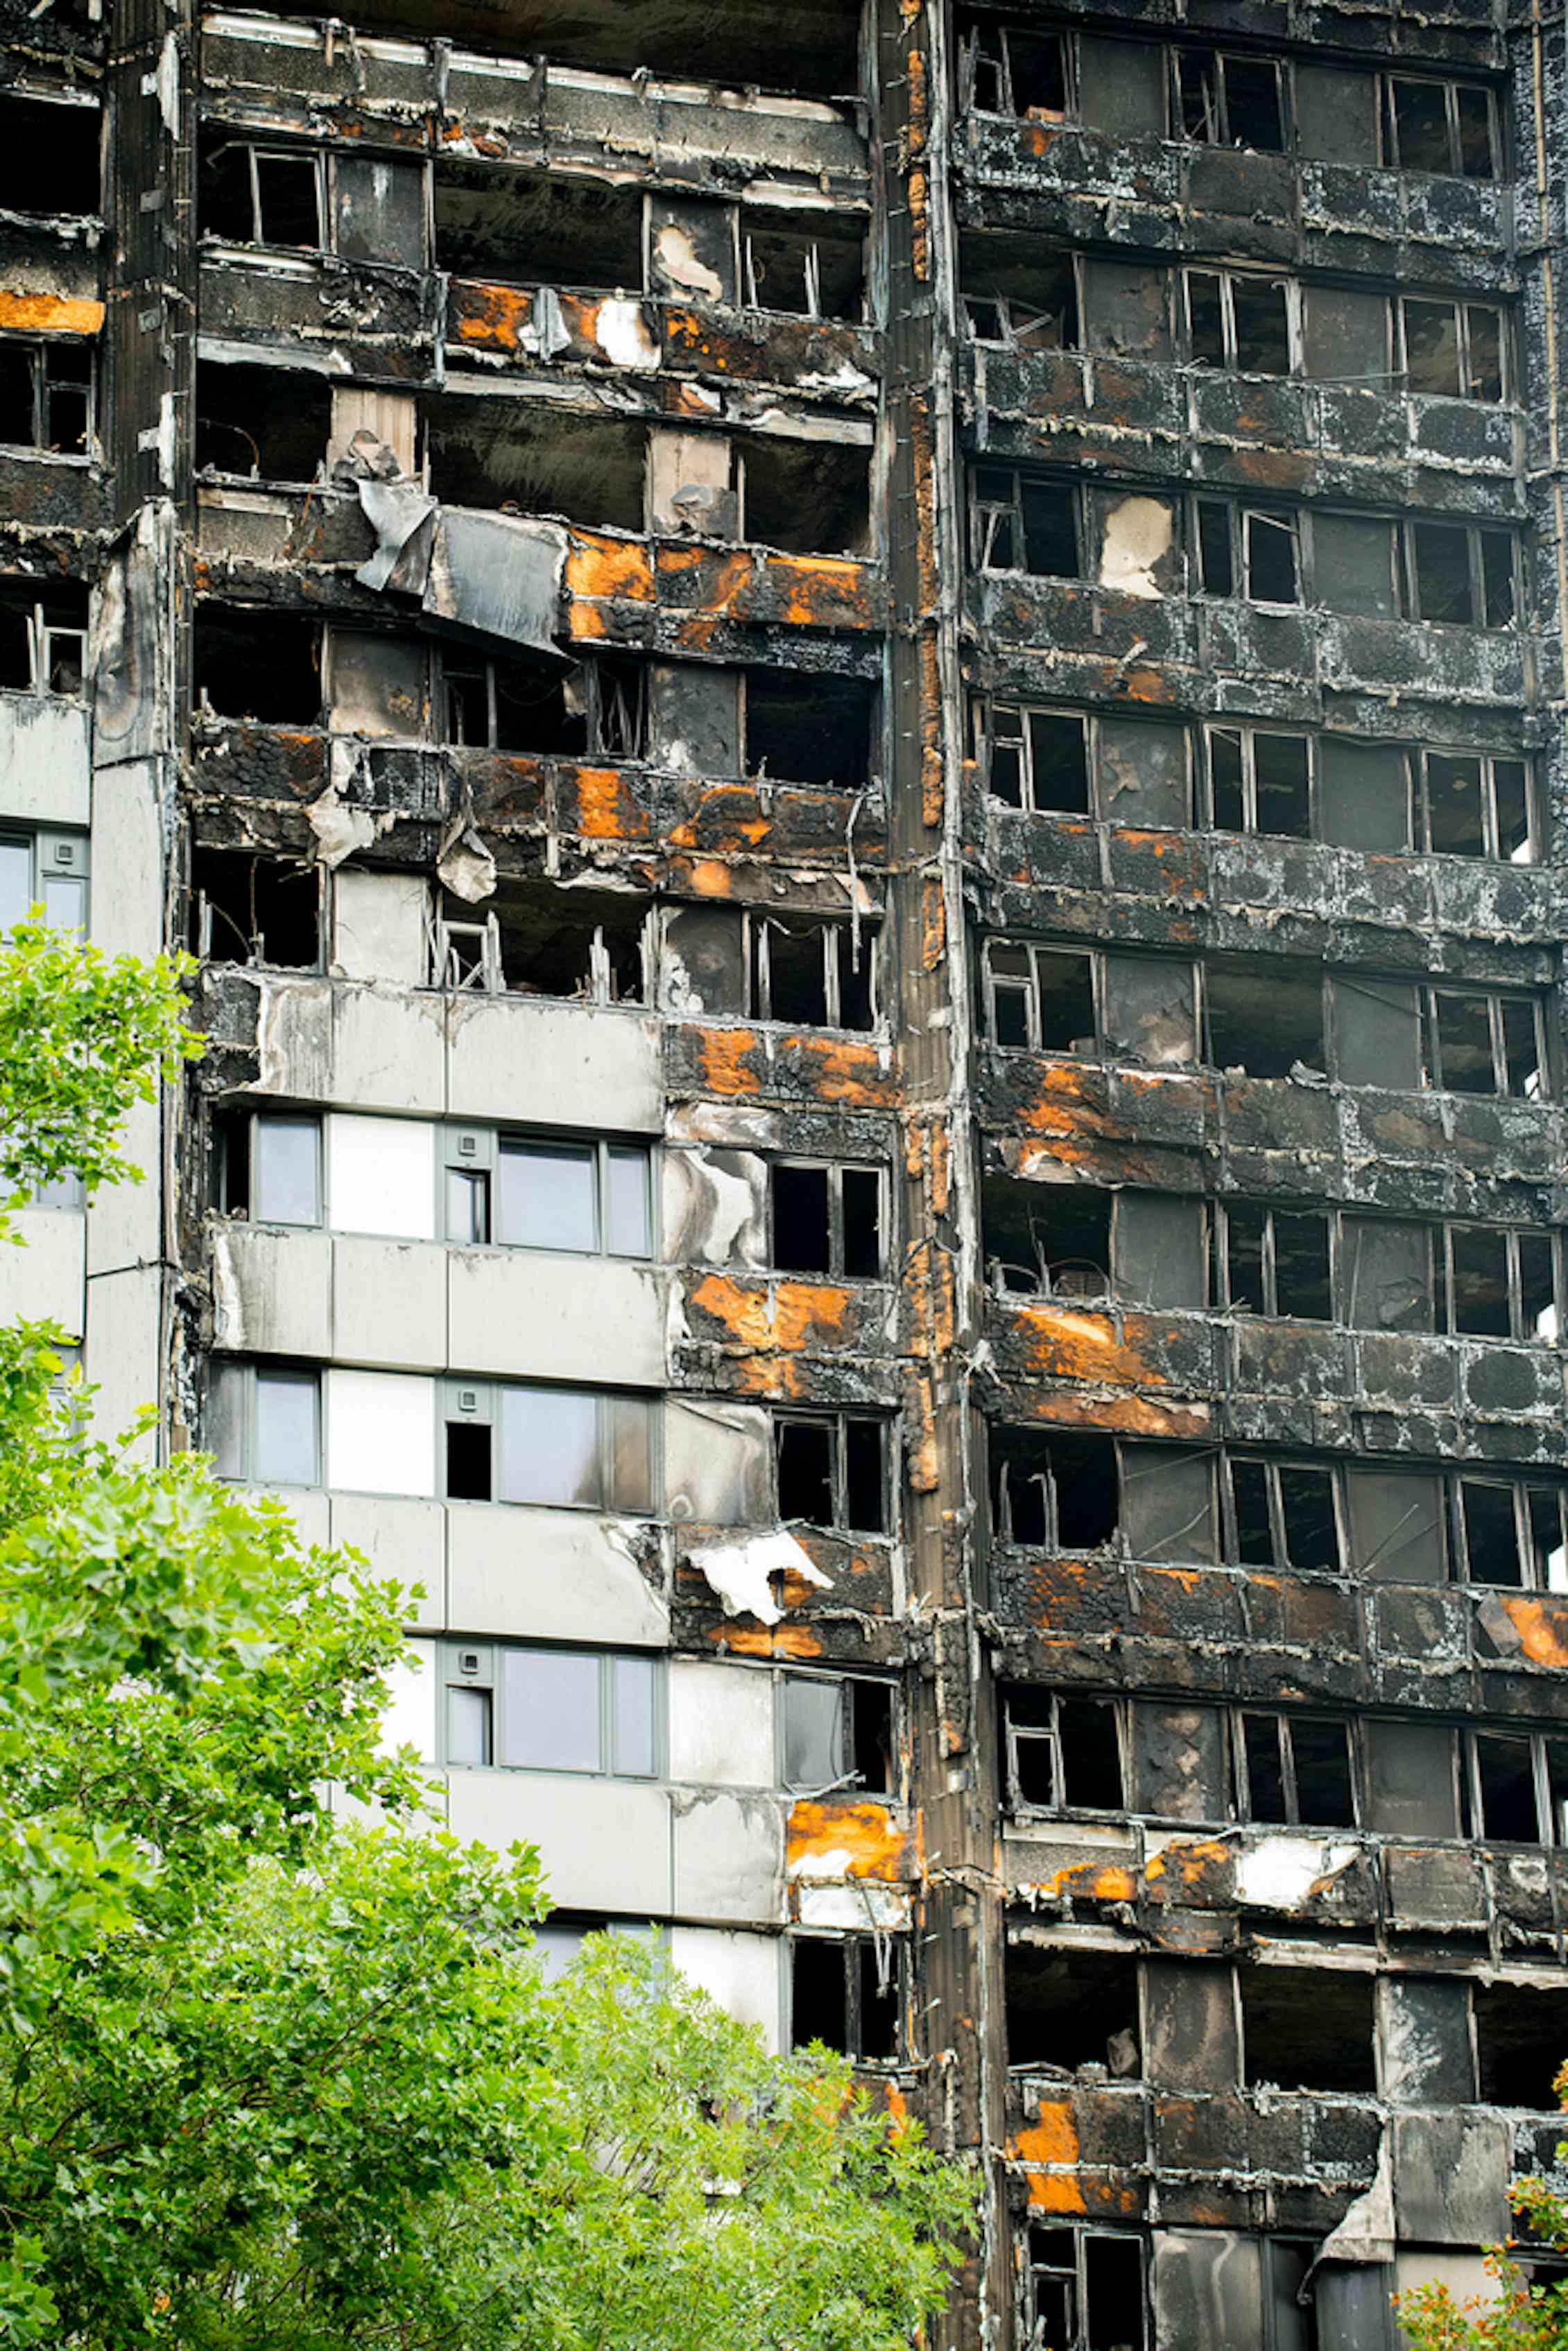 Grenfell Tower finally, the worst type of cladding is to be banned